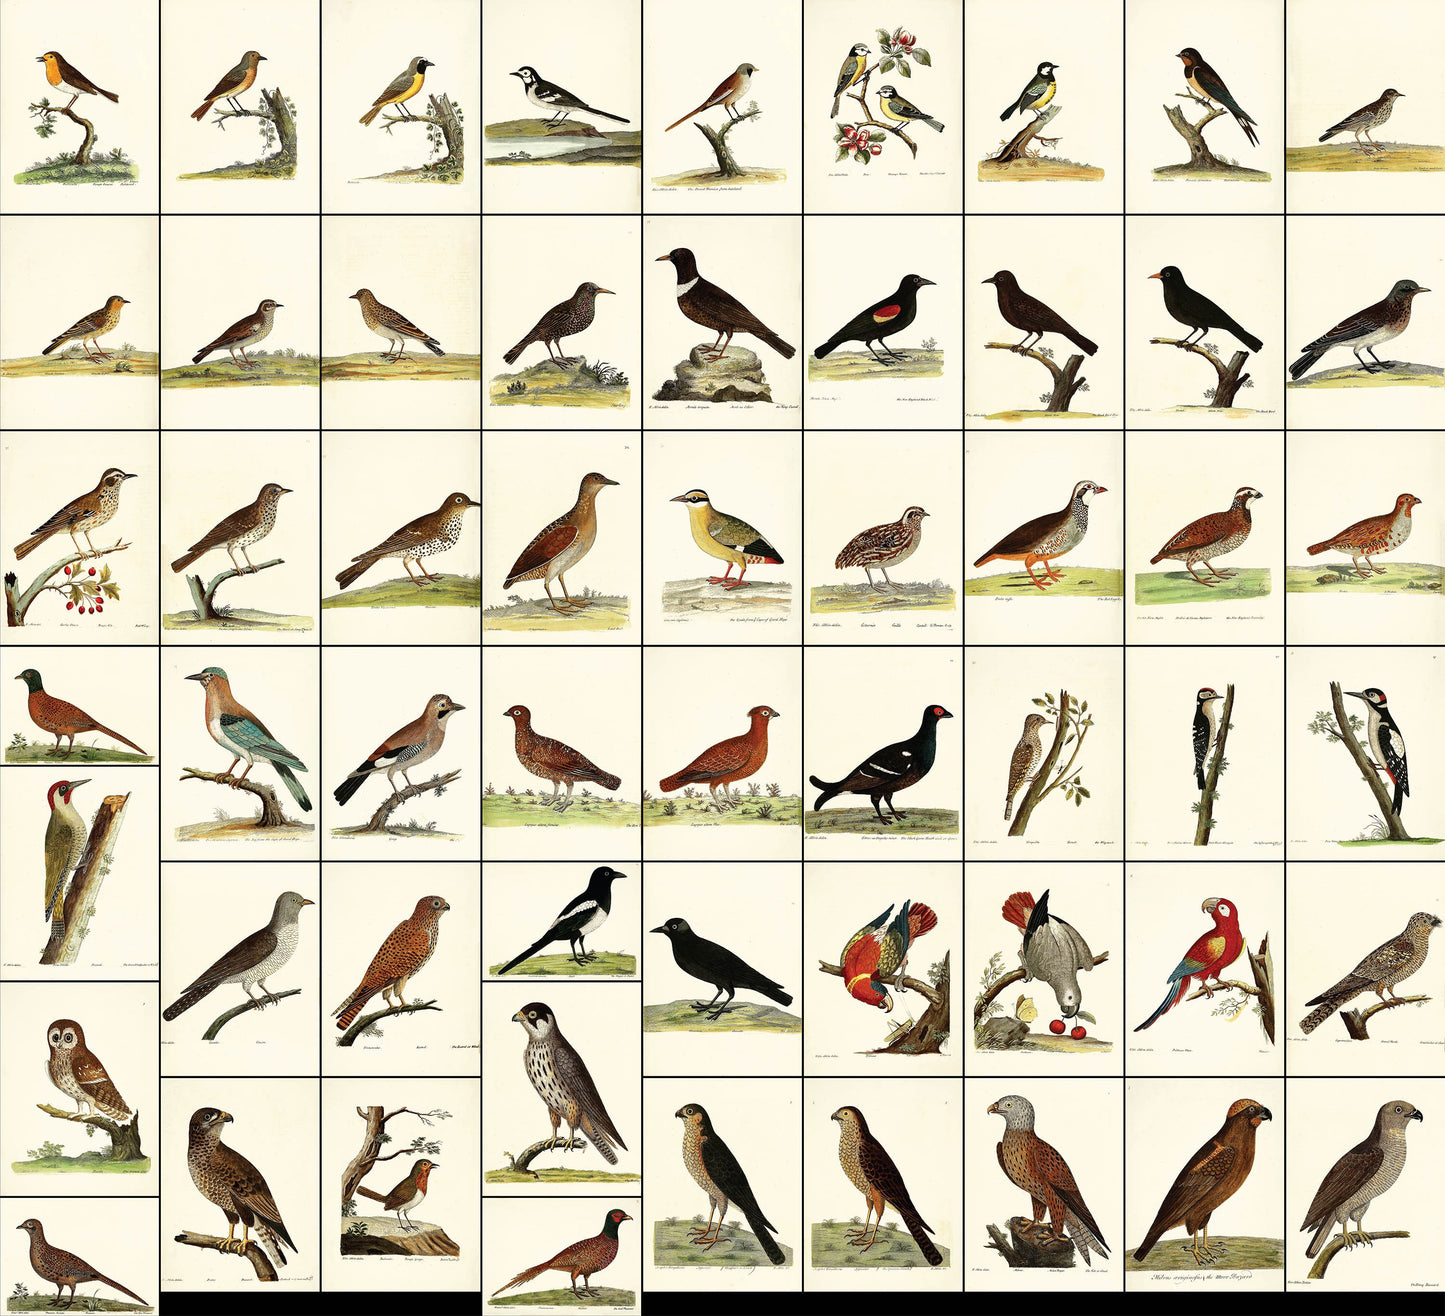 A Natural History of Birds Set 1 [56 Images]